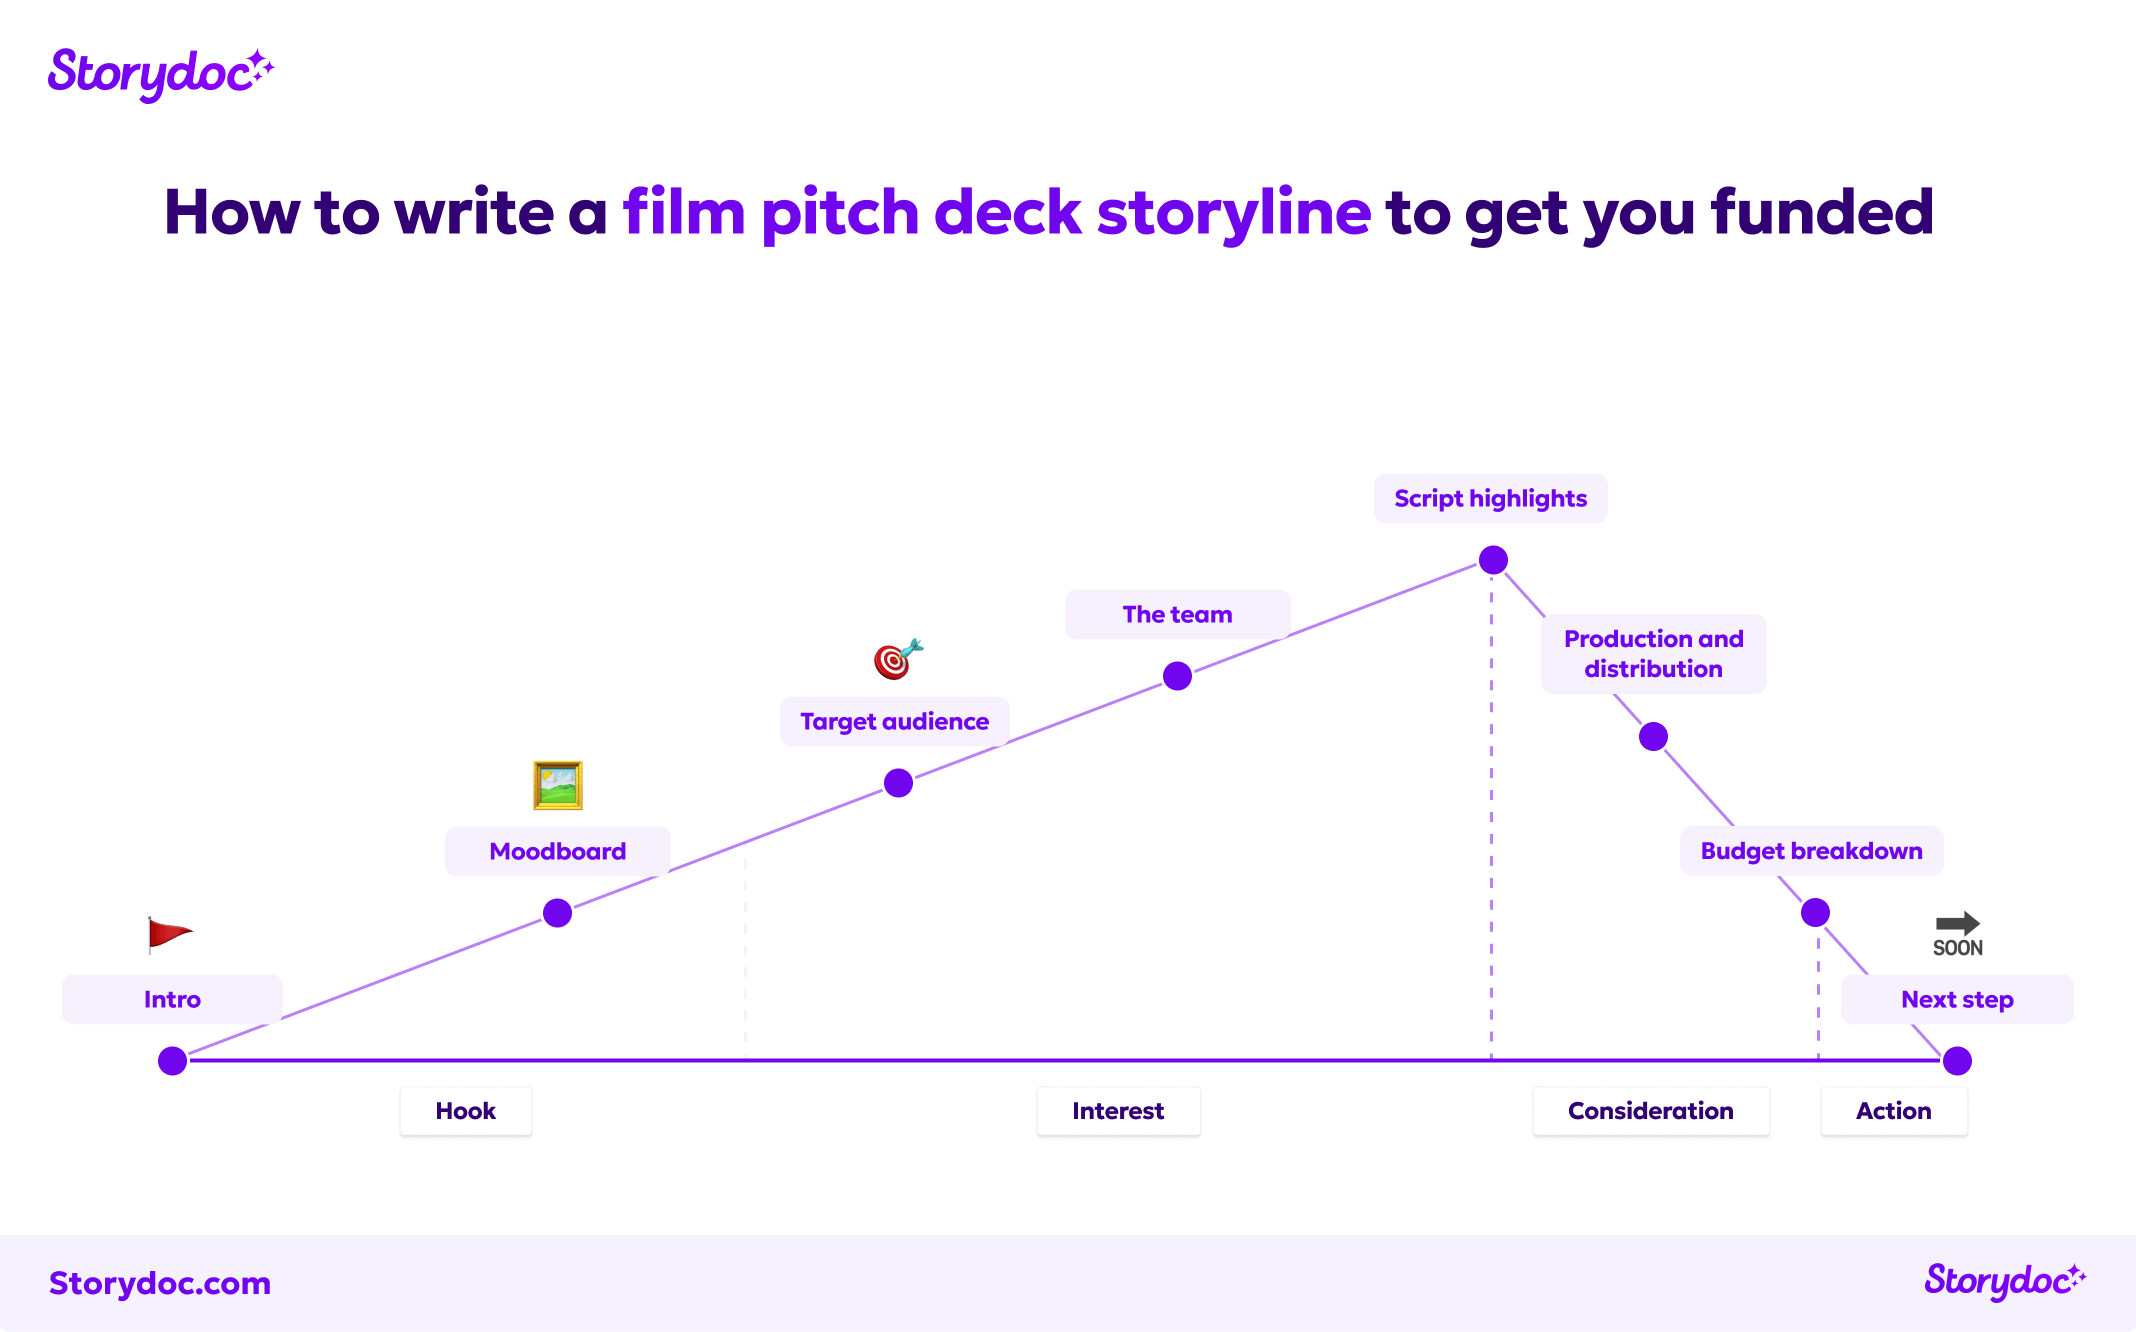 How to write a film pitch deck storyline to get you funded